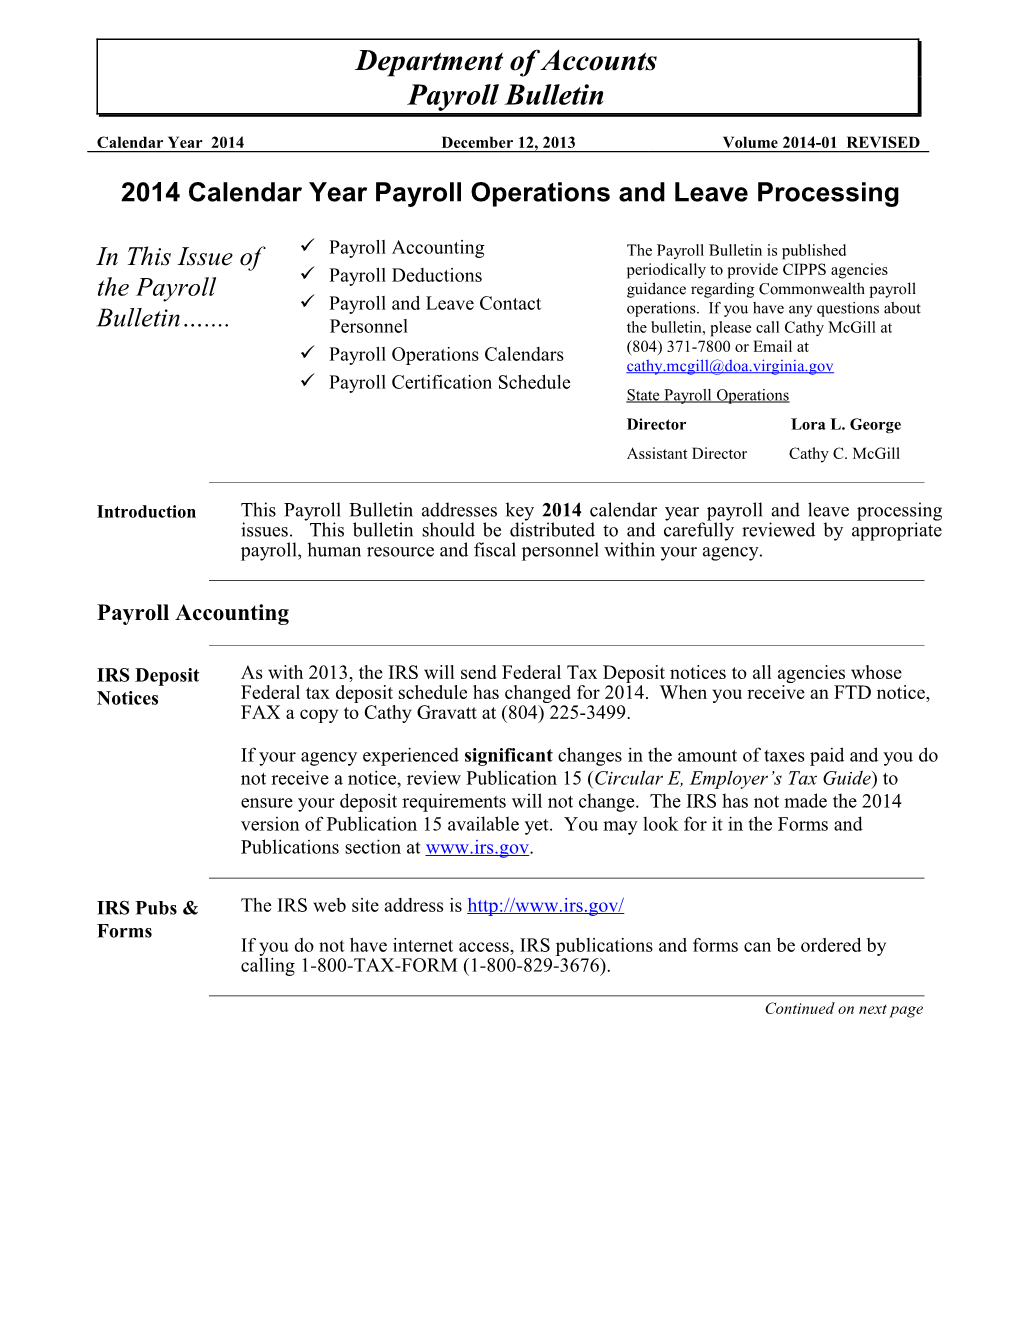 2014 Calendar Year Payroll Operations and Leave Processing